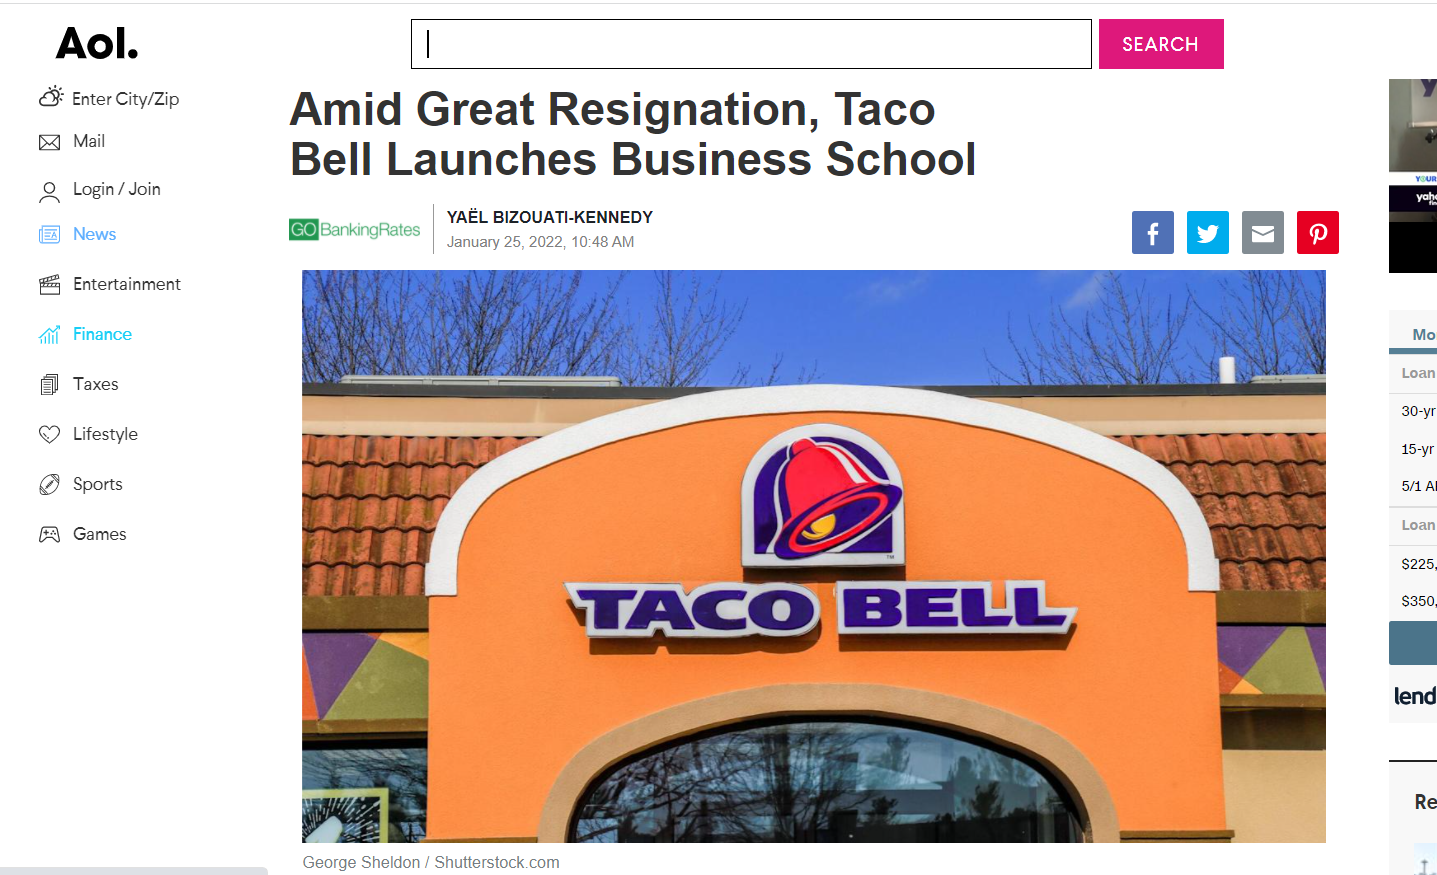 AOL Uses George Sheldon Taco Bell Image in News Article